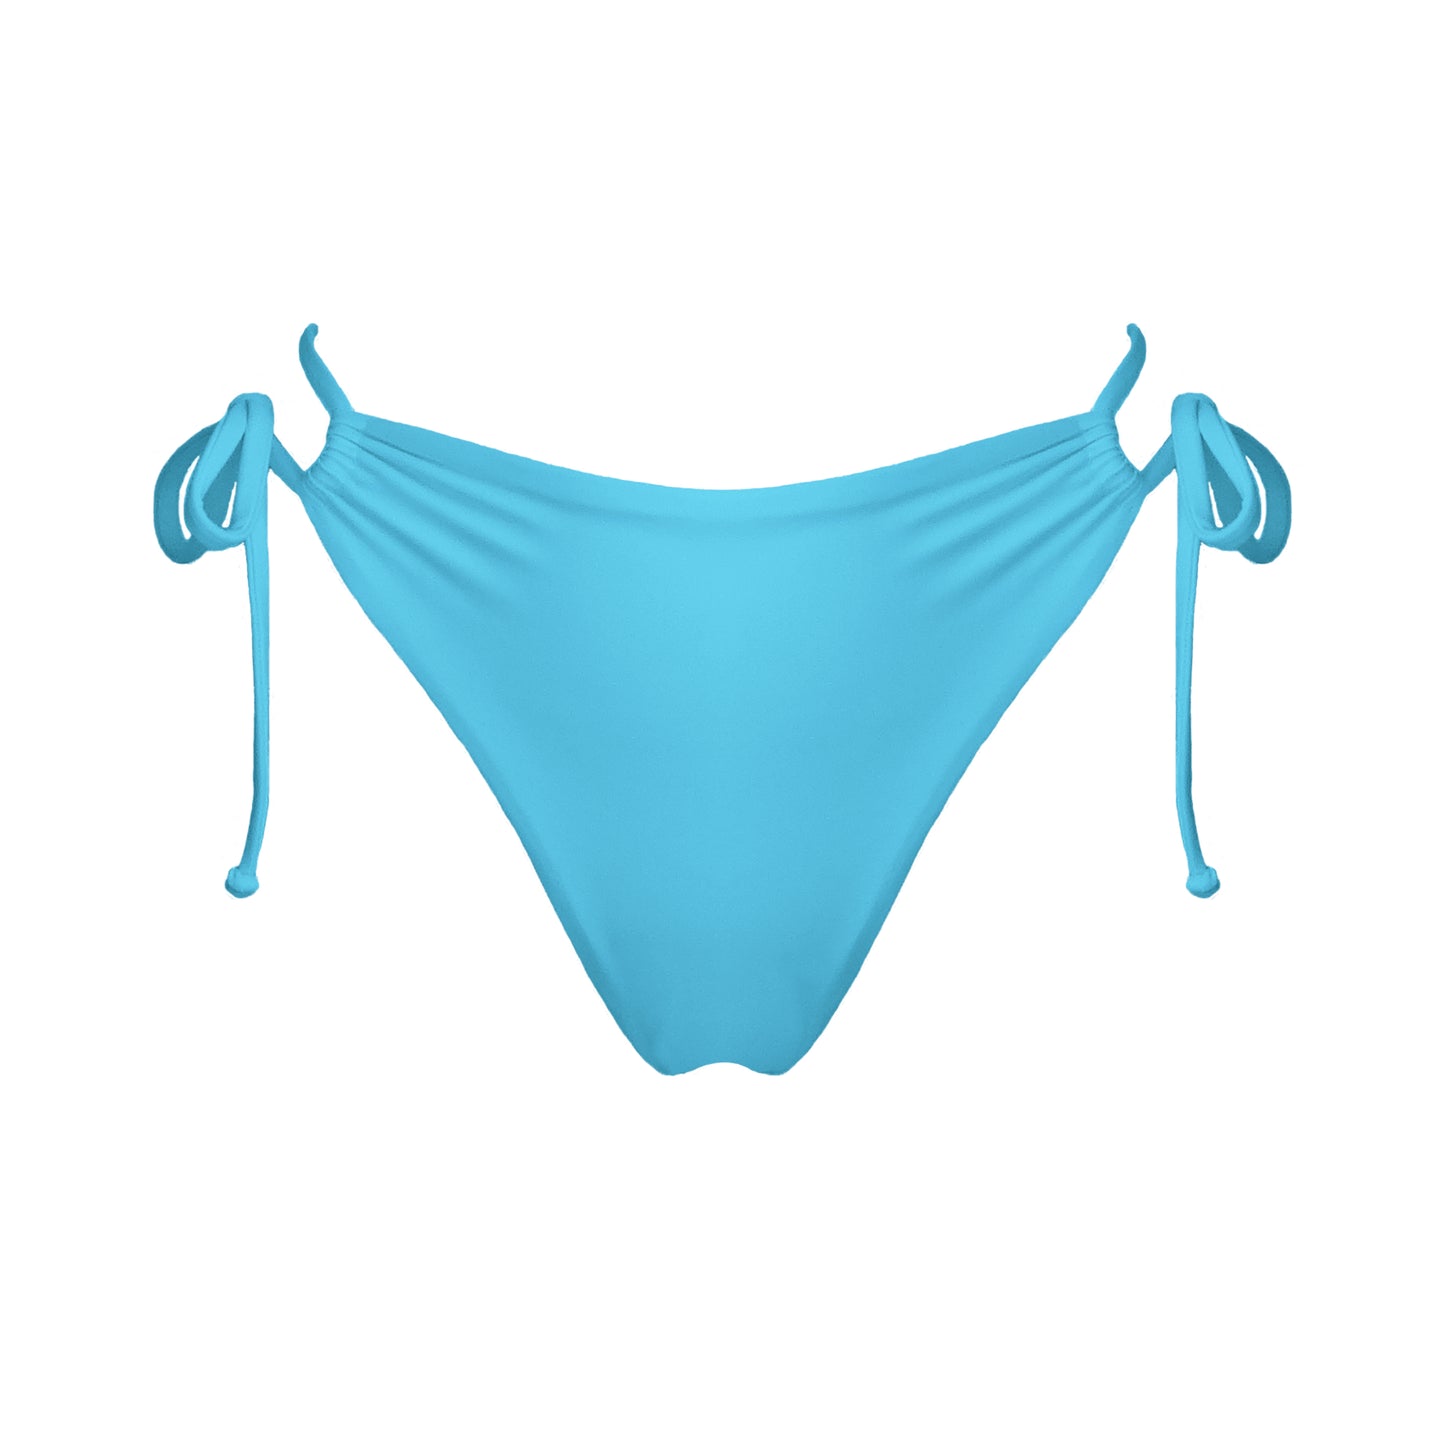 Acqua blue strappy mid-rise bikini bottoms with high cut legs and cheeky coverage.